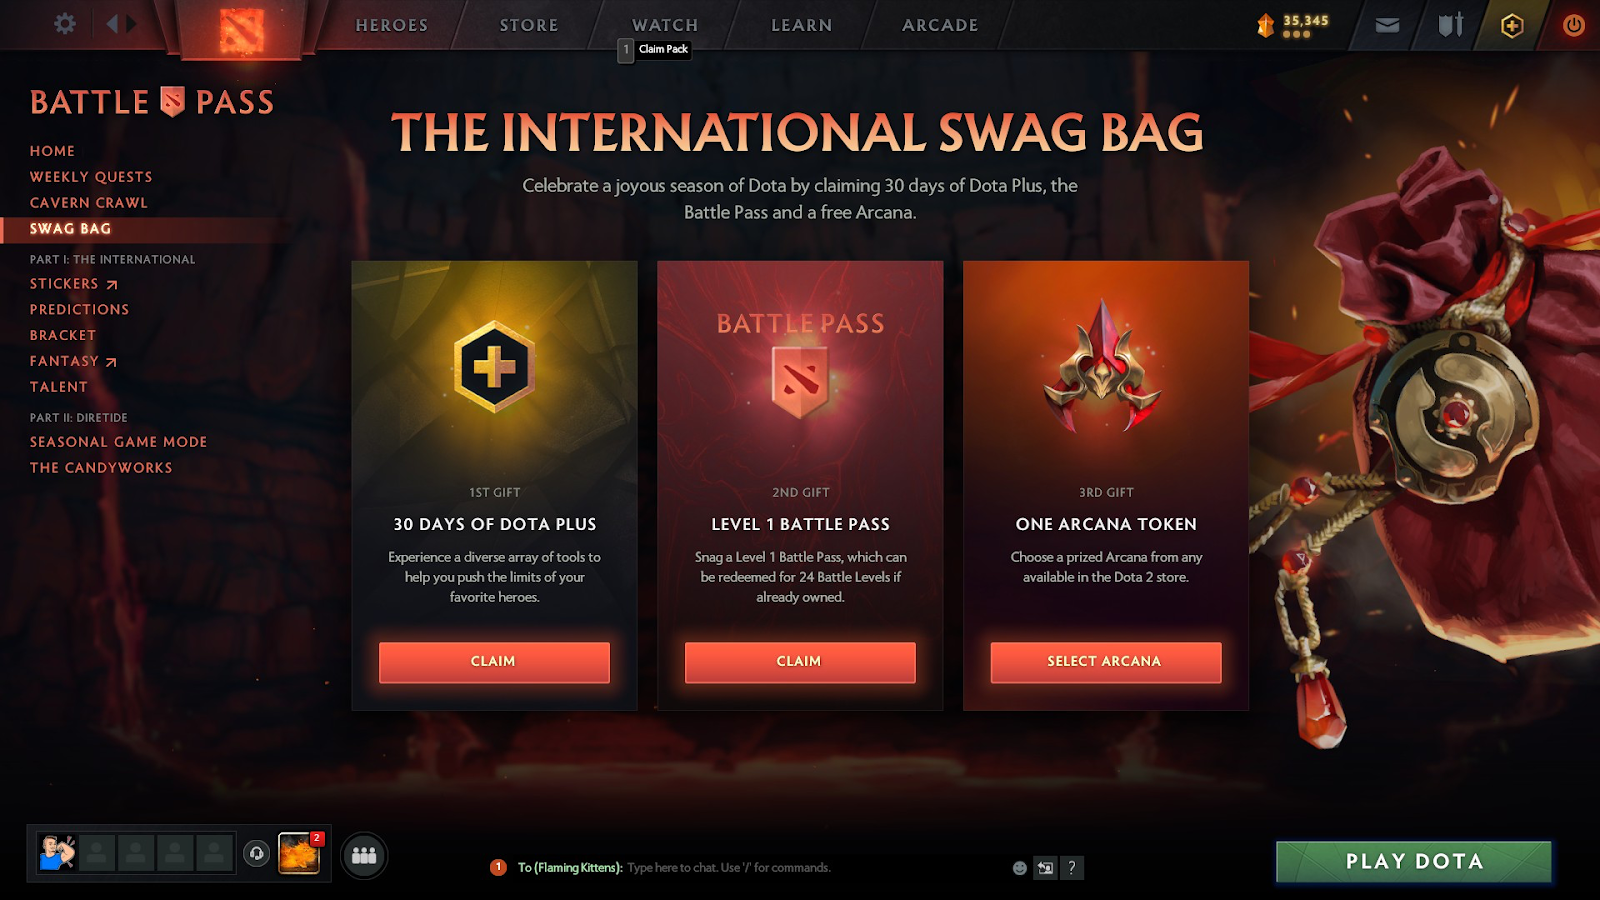 Dota 2, Dota 2: How to Get Free Arcana, Touch Touch Play